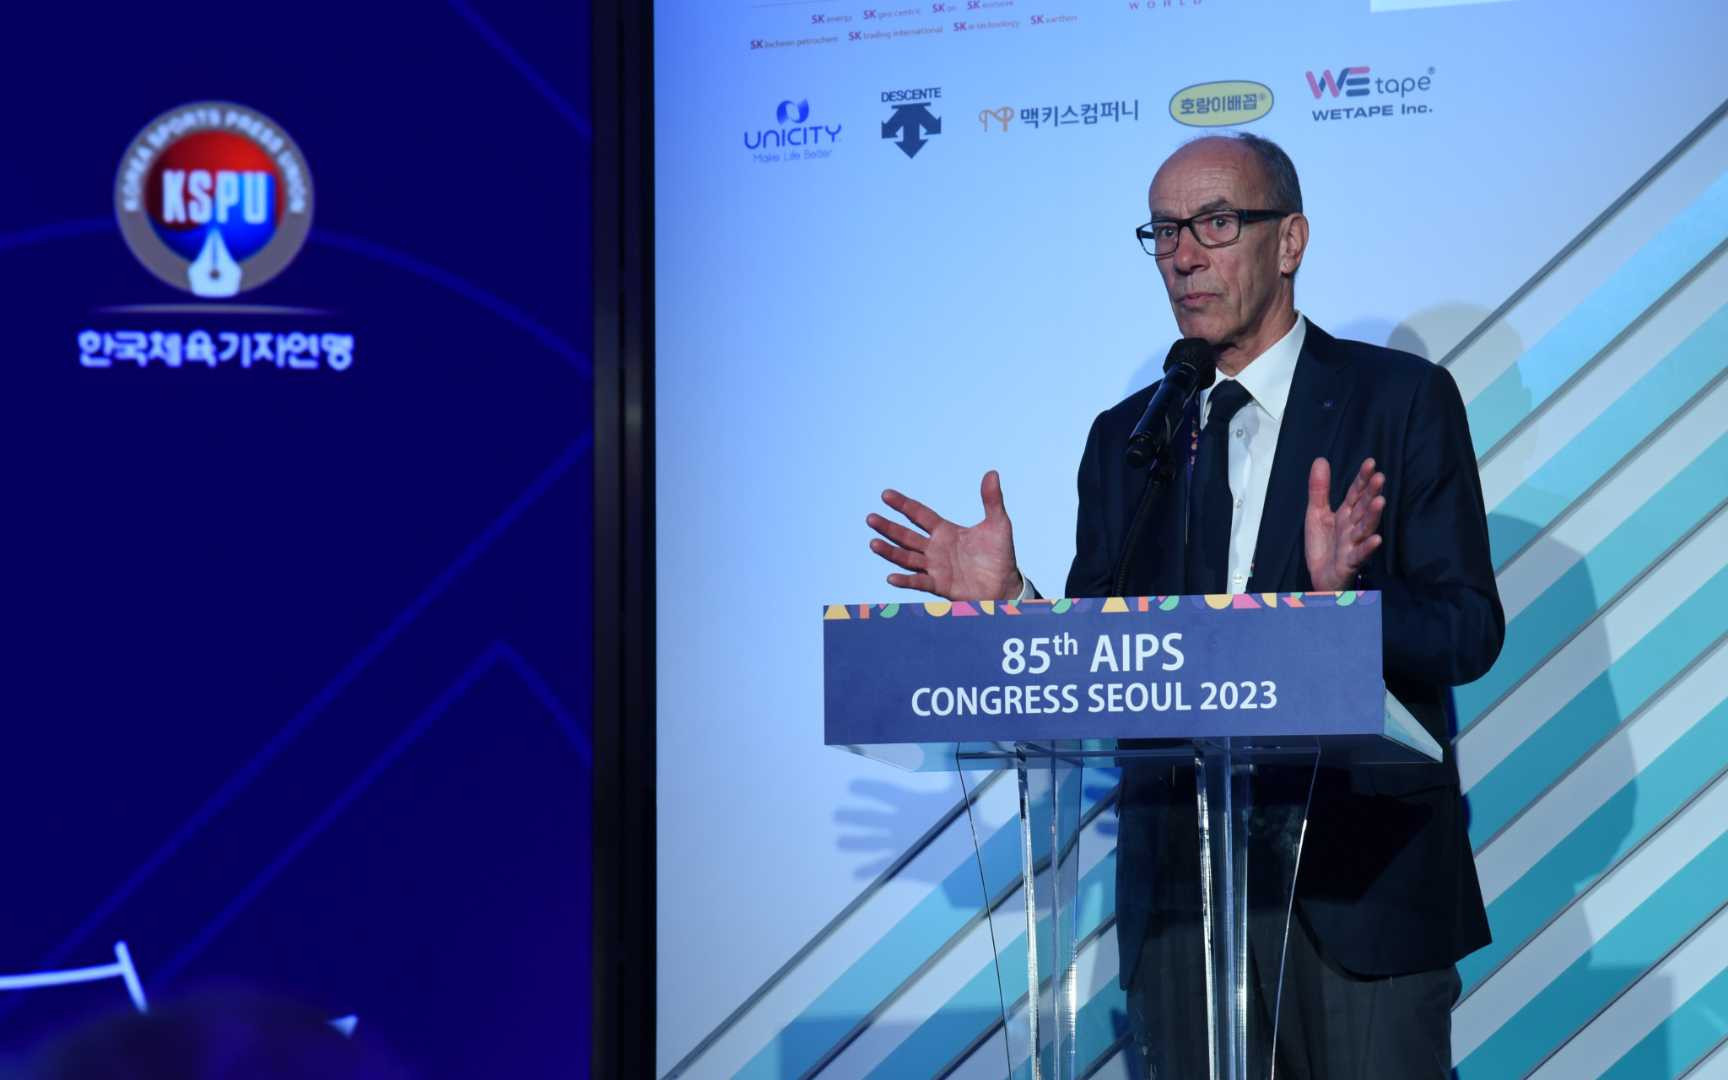 FISU Acting President Leonz Eder used a speech at the Congress to thank AIPS for its partnership ©AIPS